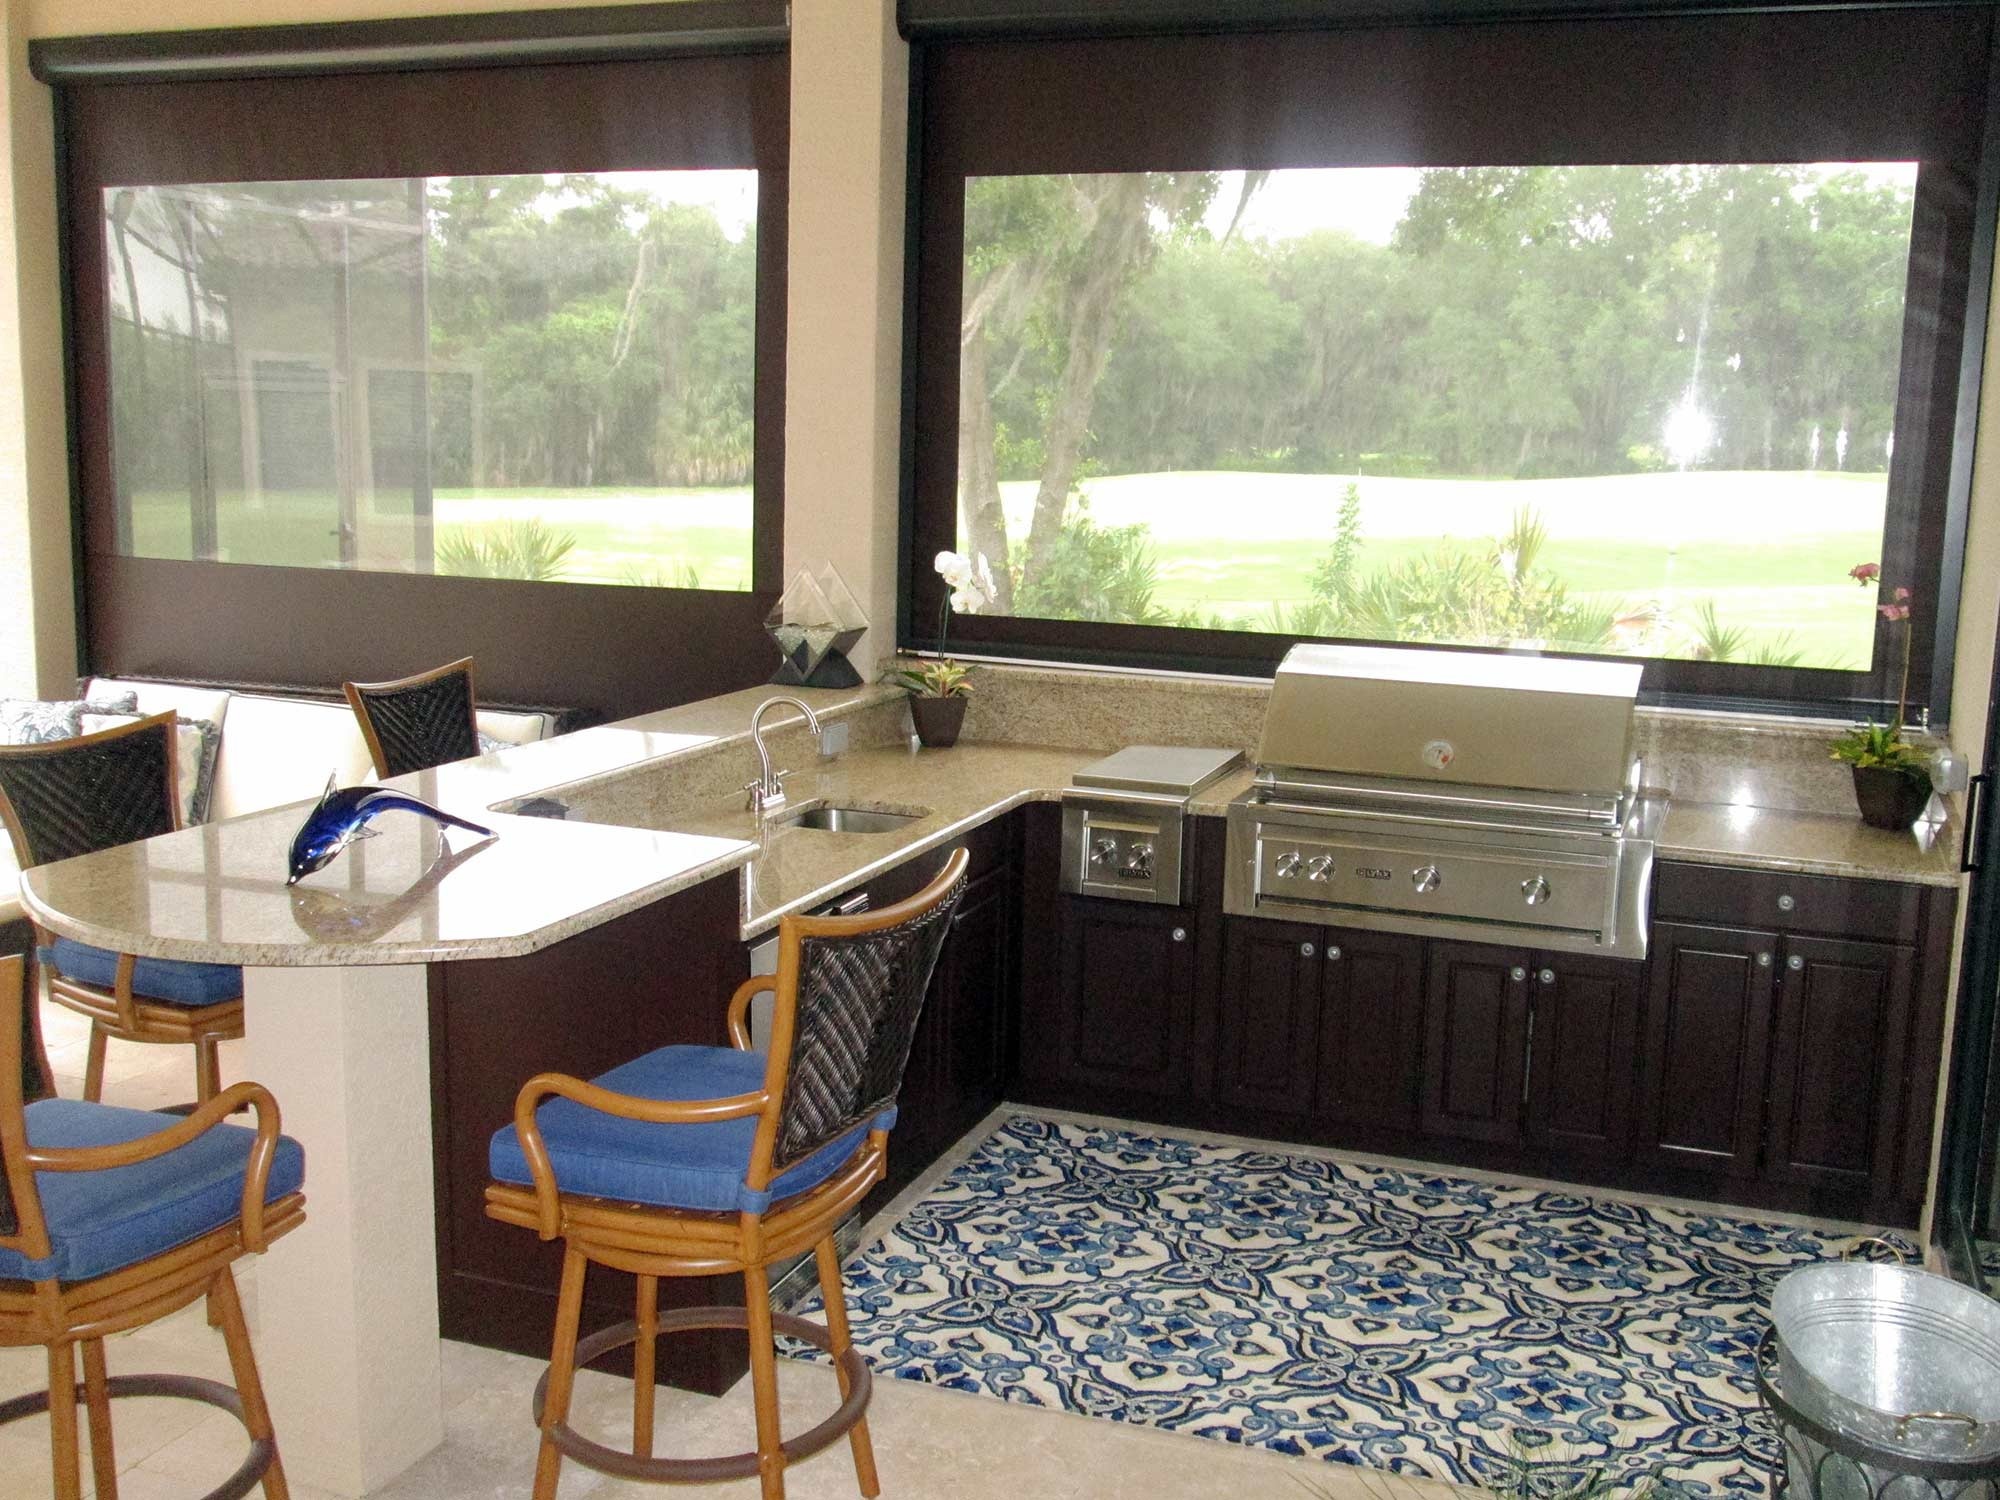 Outdoor Kitchen Cabinet Ideas
 Outdoor Kitchen Cabinets & More